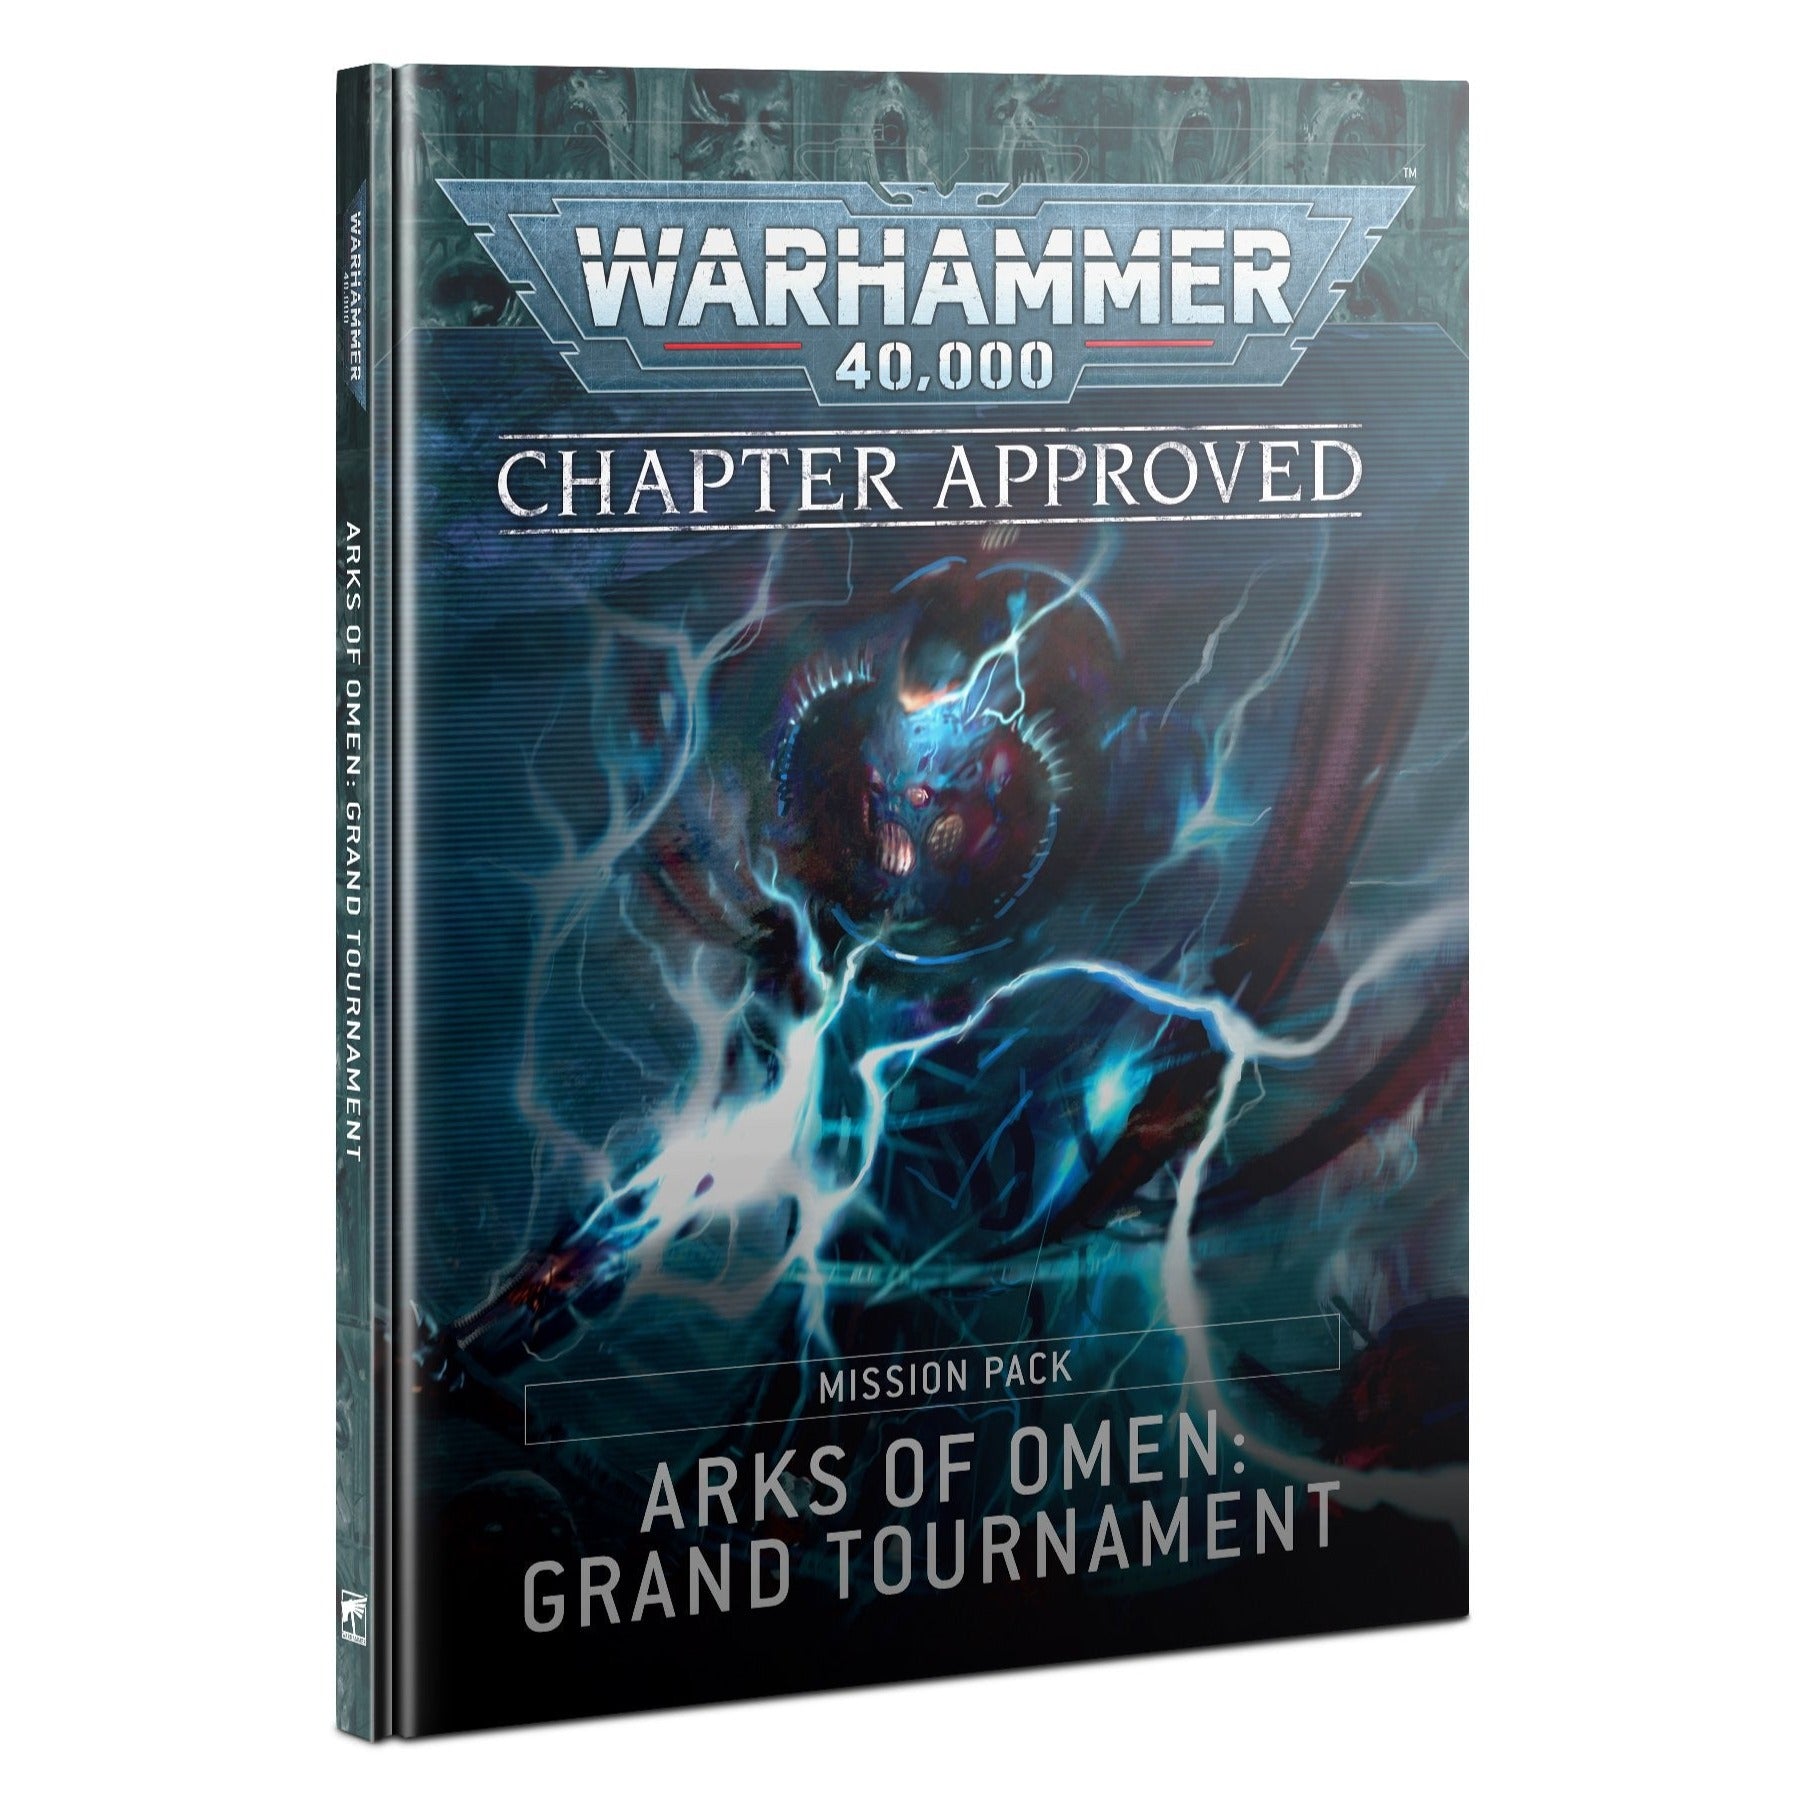 Mission Pack: Arks of Omen: Grand Tournament